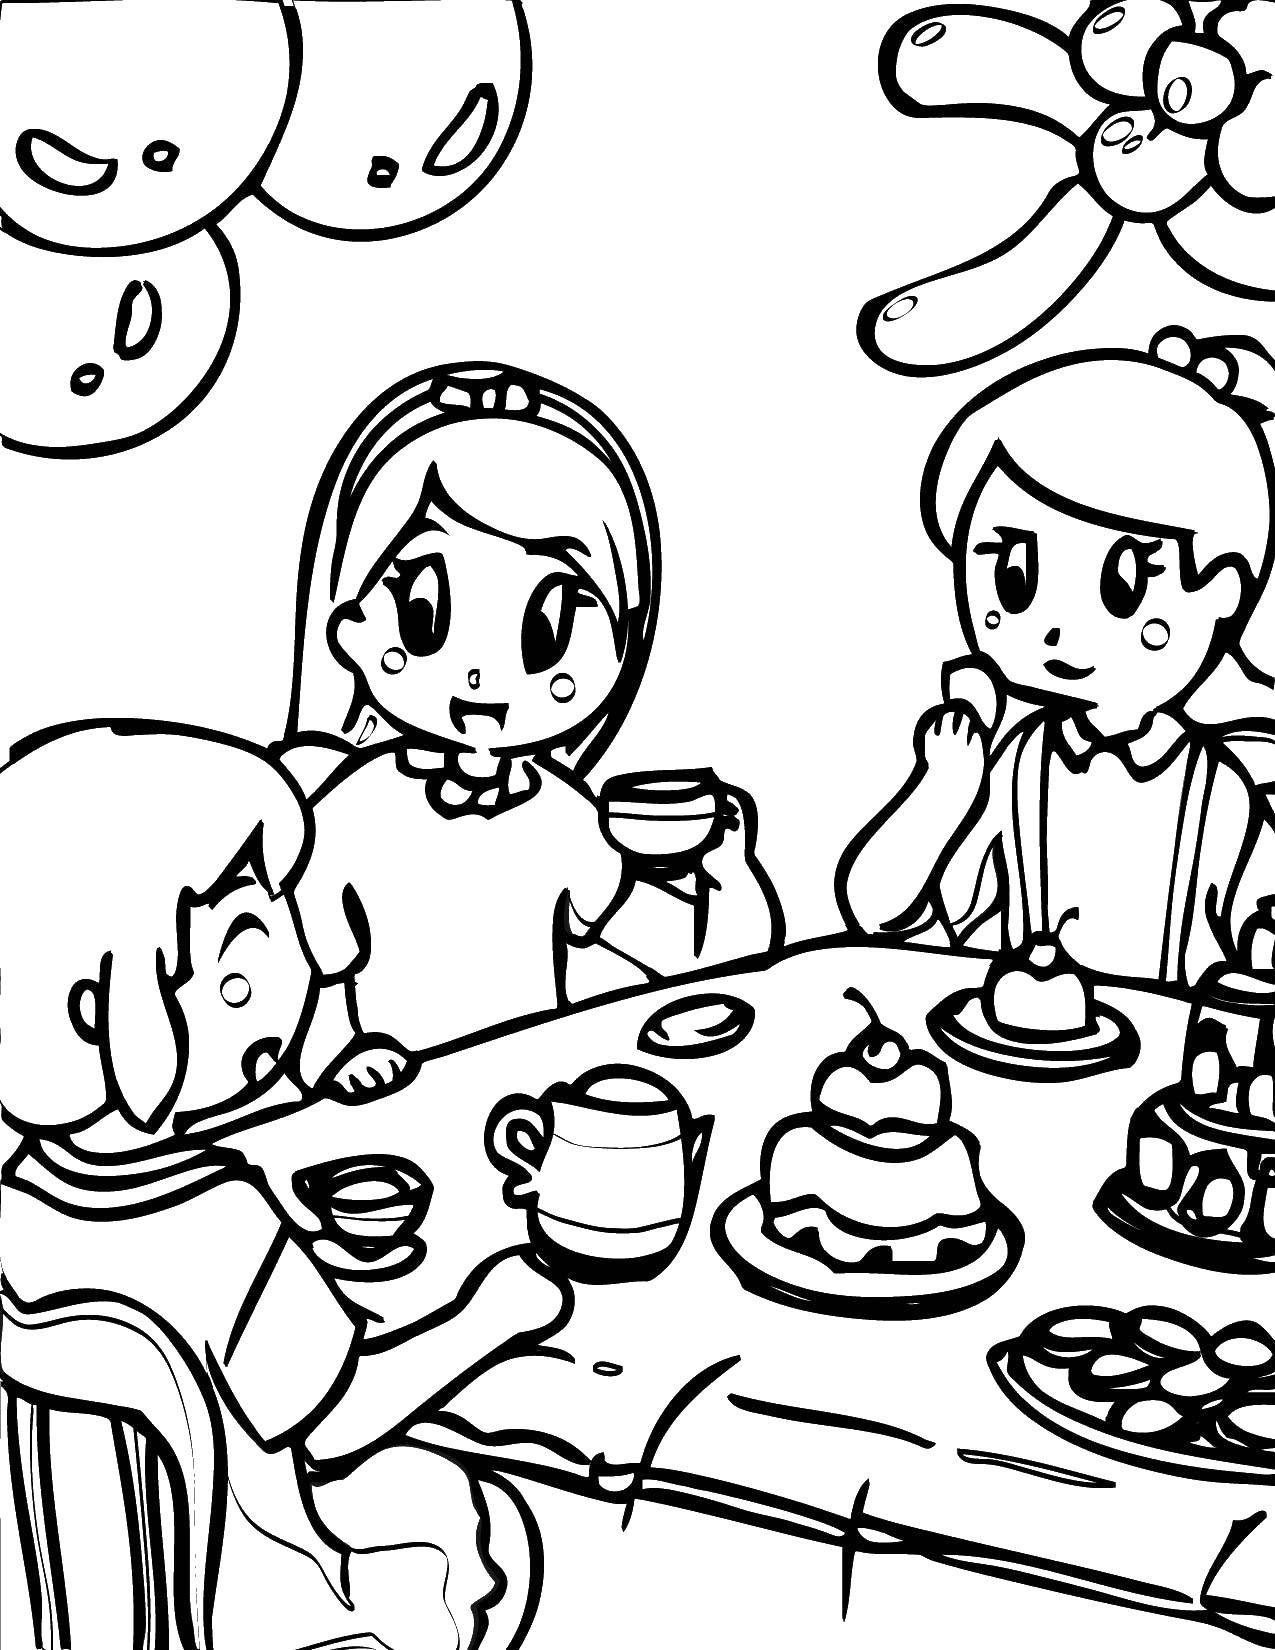 Coloring Girls and set the table. Category birthday. Tags:  children, table, cake, balloons.